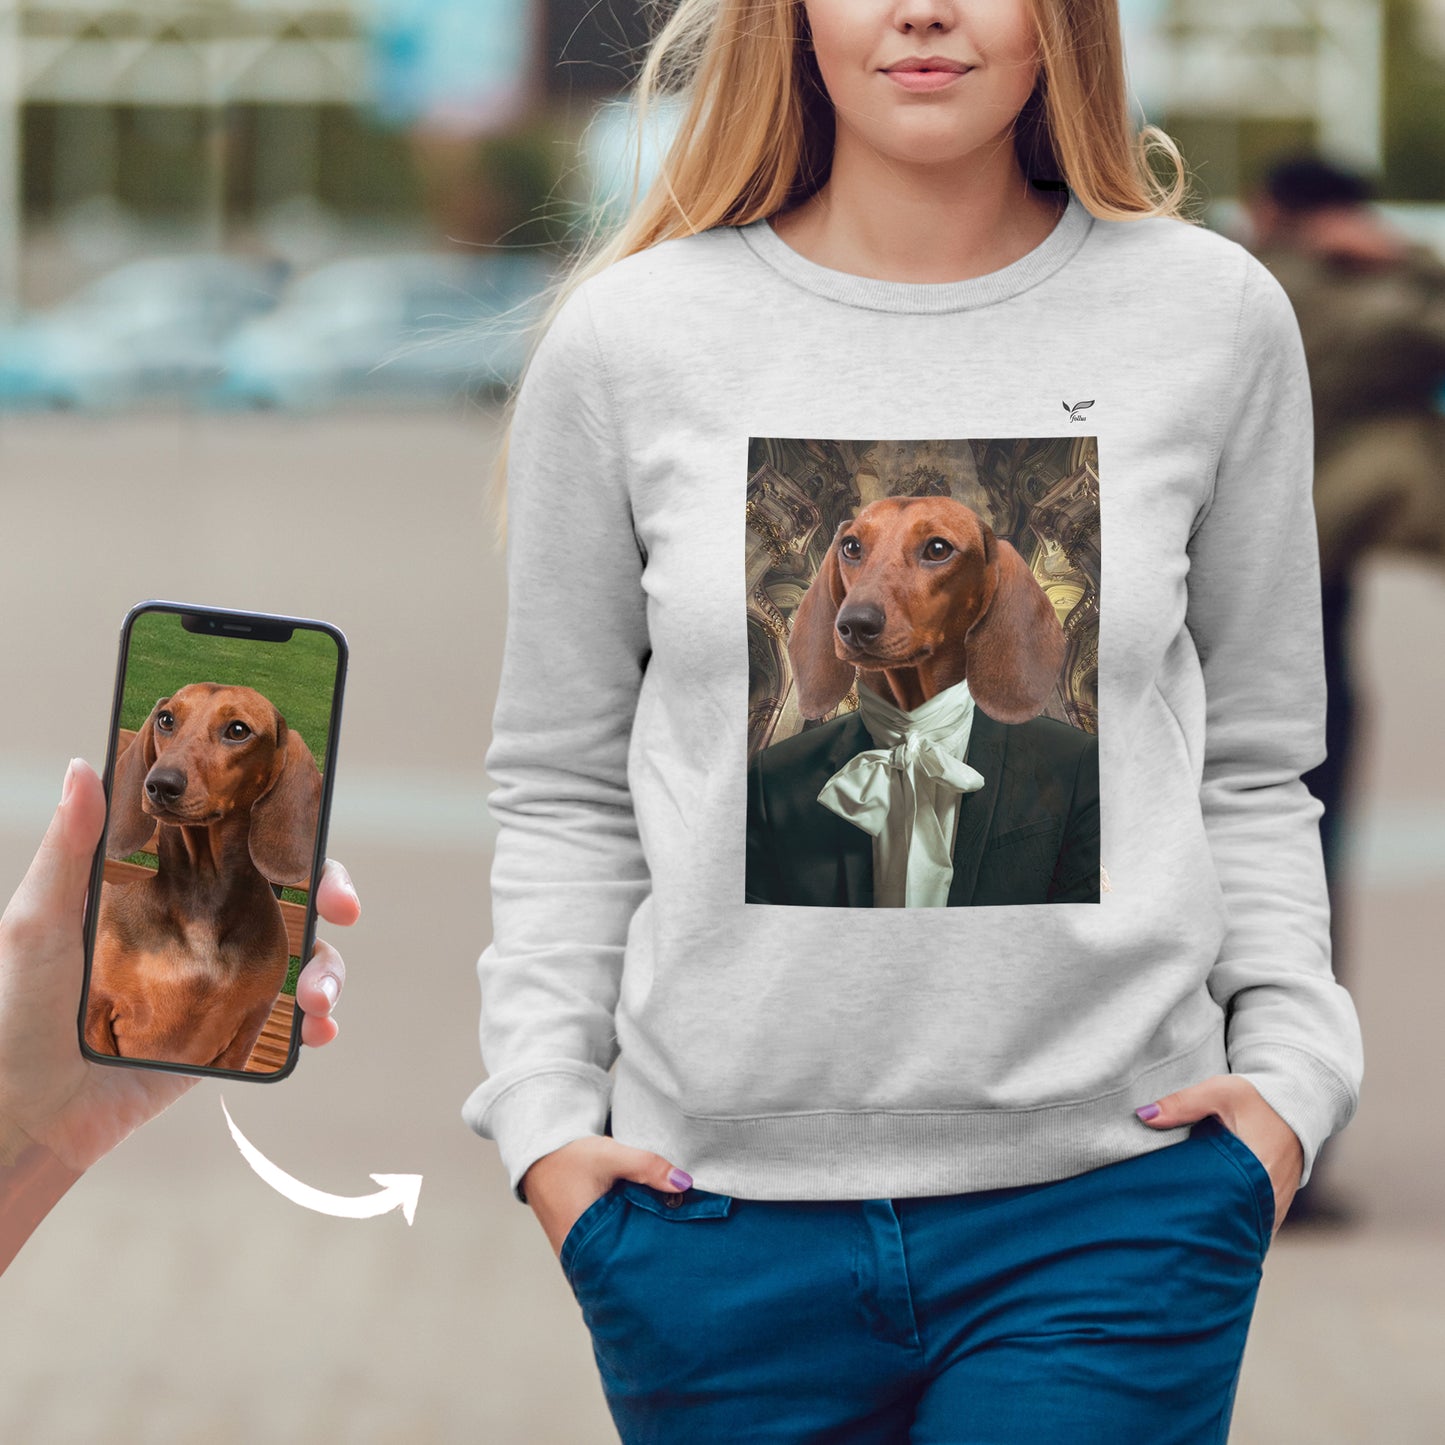 The Ambassador - Personalized Sweatshirt With Your Pet's Photo